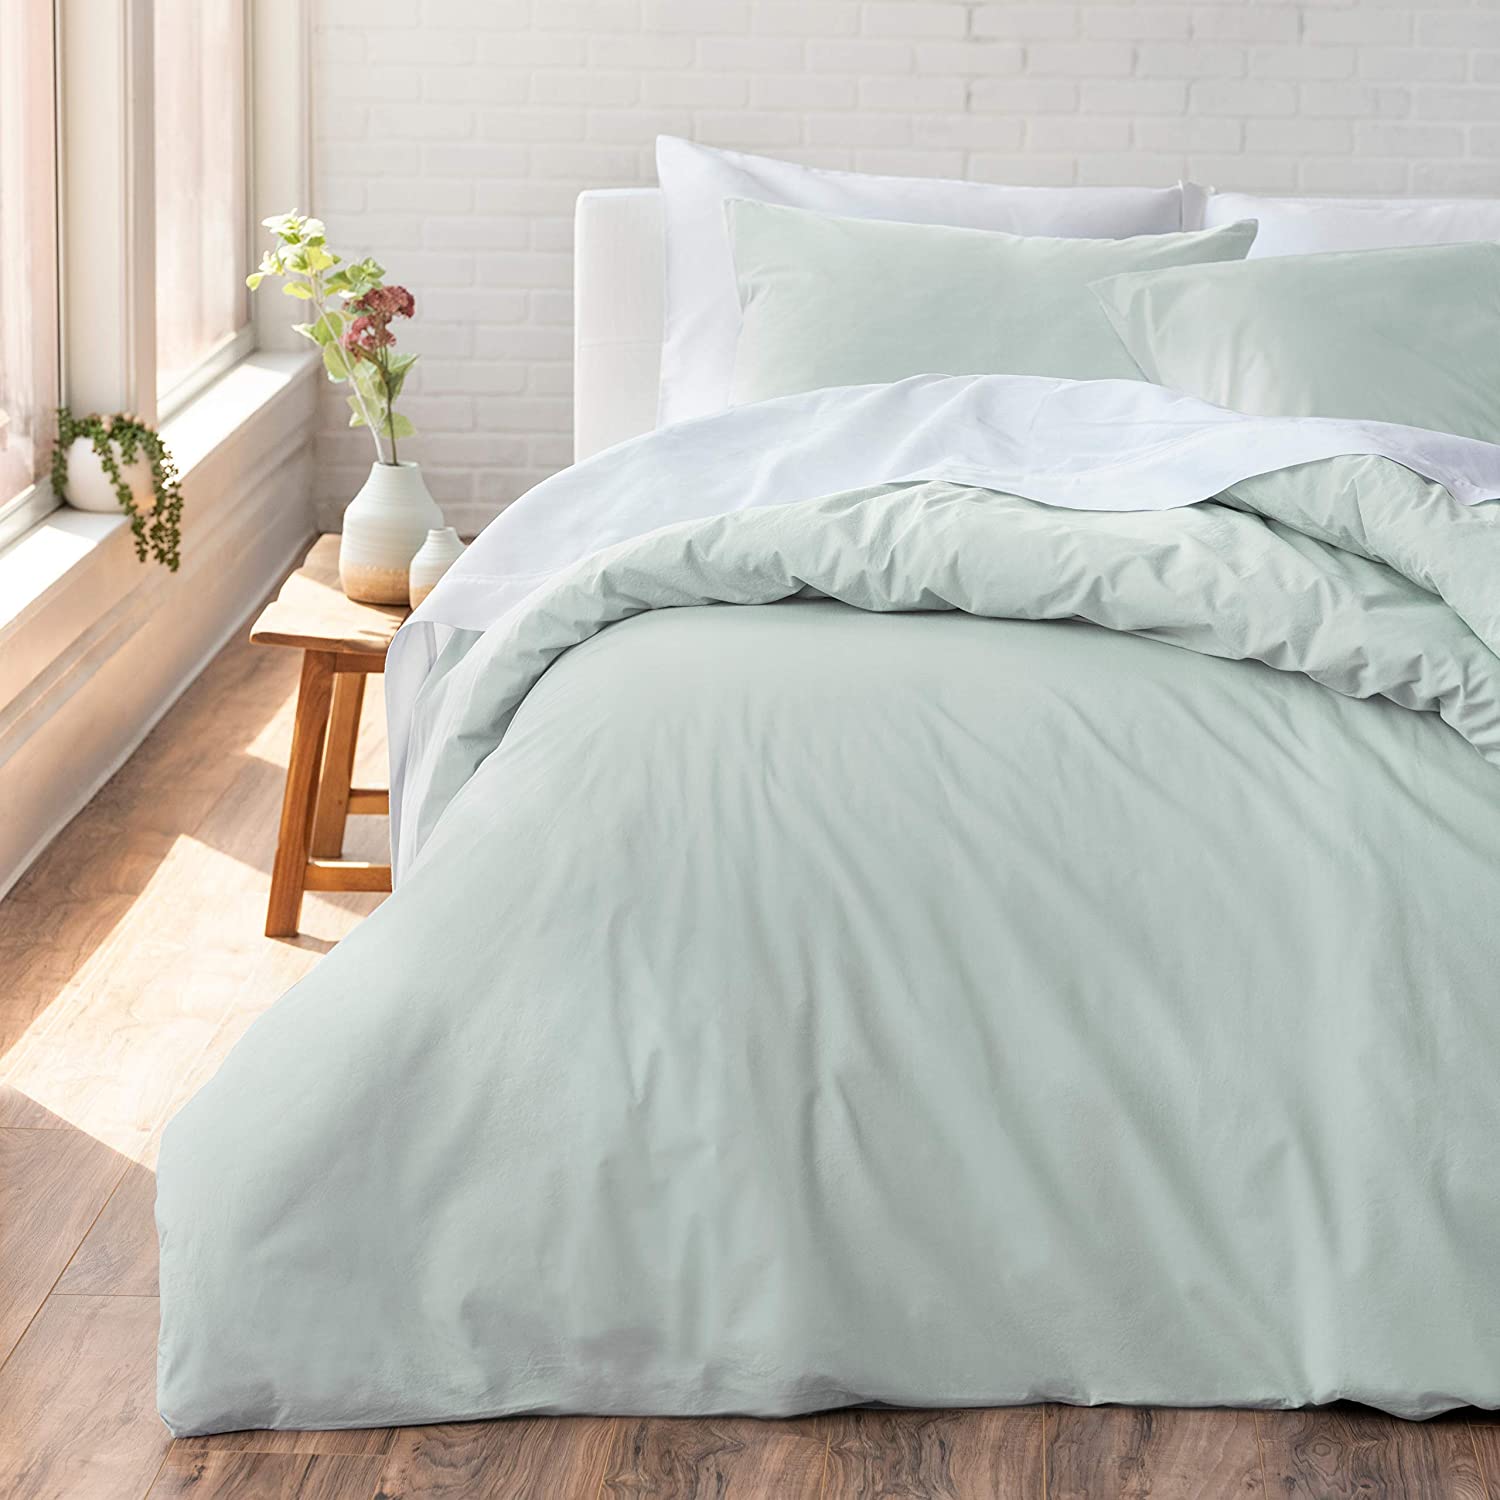 Price:$69.99  Cozy 100% Cotton Percale Washed Reversible Duvet Cover Set | Queen Size (Seafoam) | 88" x 92" | 3 Piece Set | Lightweight | Cool & Crisp | Breathable | Ideal for Summers : Home & Kitchen